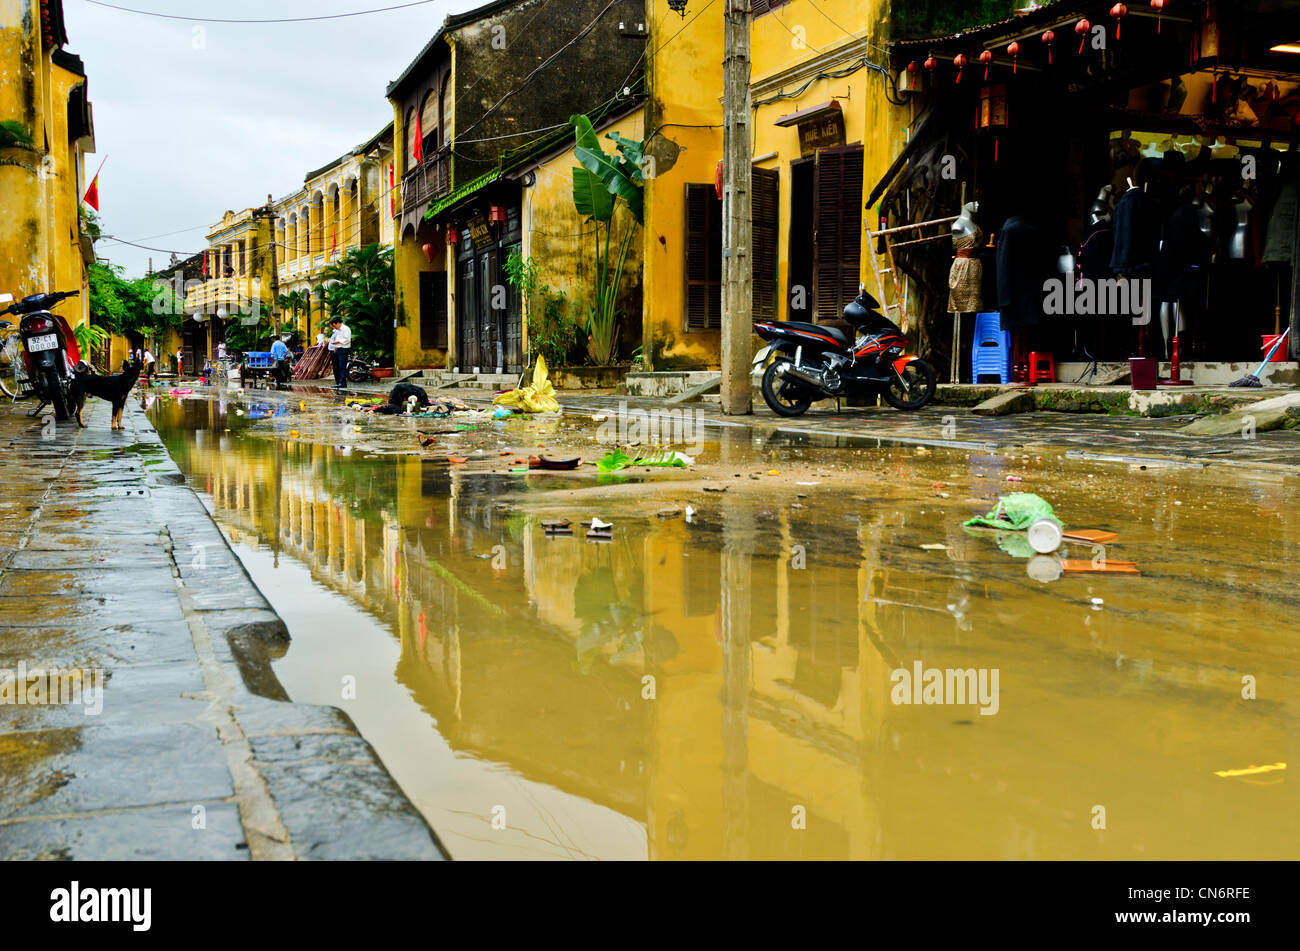 Debris Remaining on Streets After Flooding in Hoi An, Vietnam Stock Photo